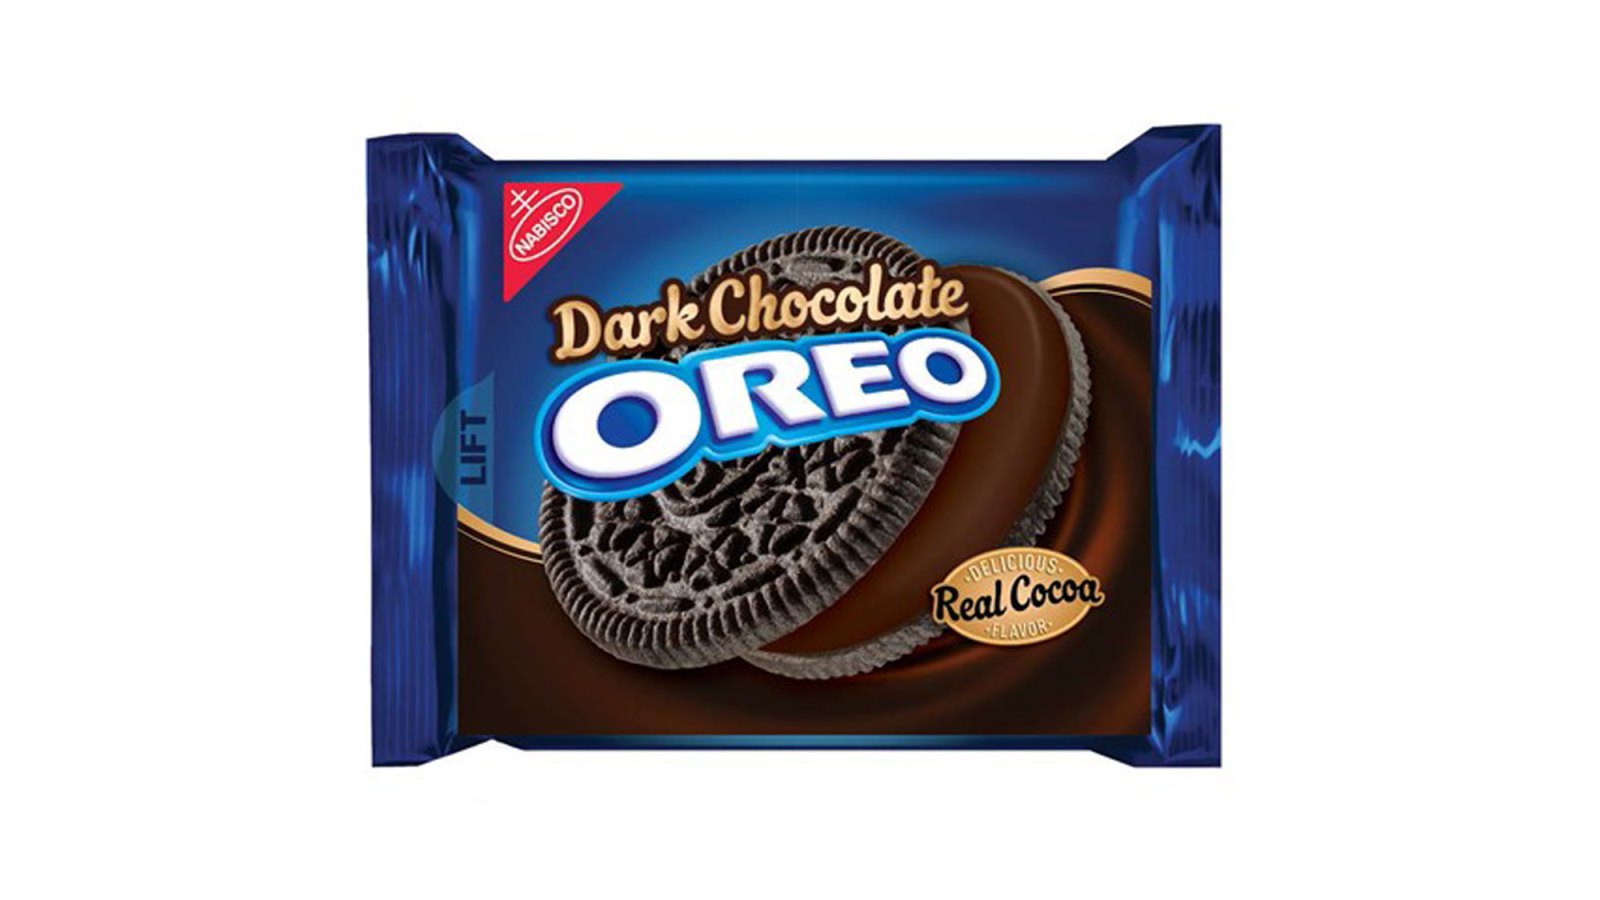 Dark Chocolate Oreos Slated to Join Roster of Permanent Flavors, Will Go on Sale in 2019